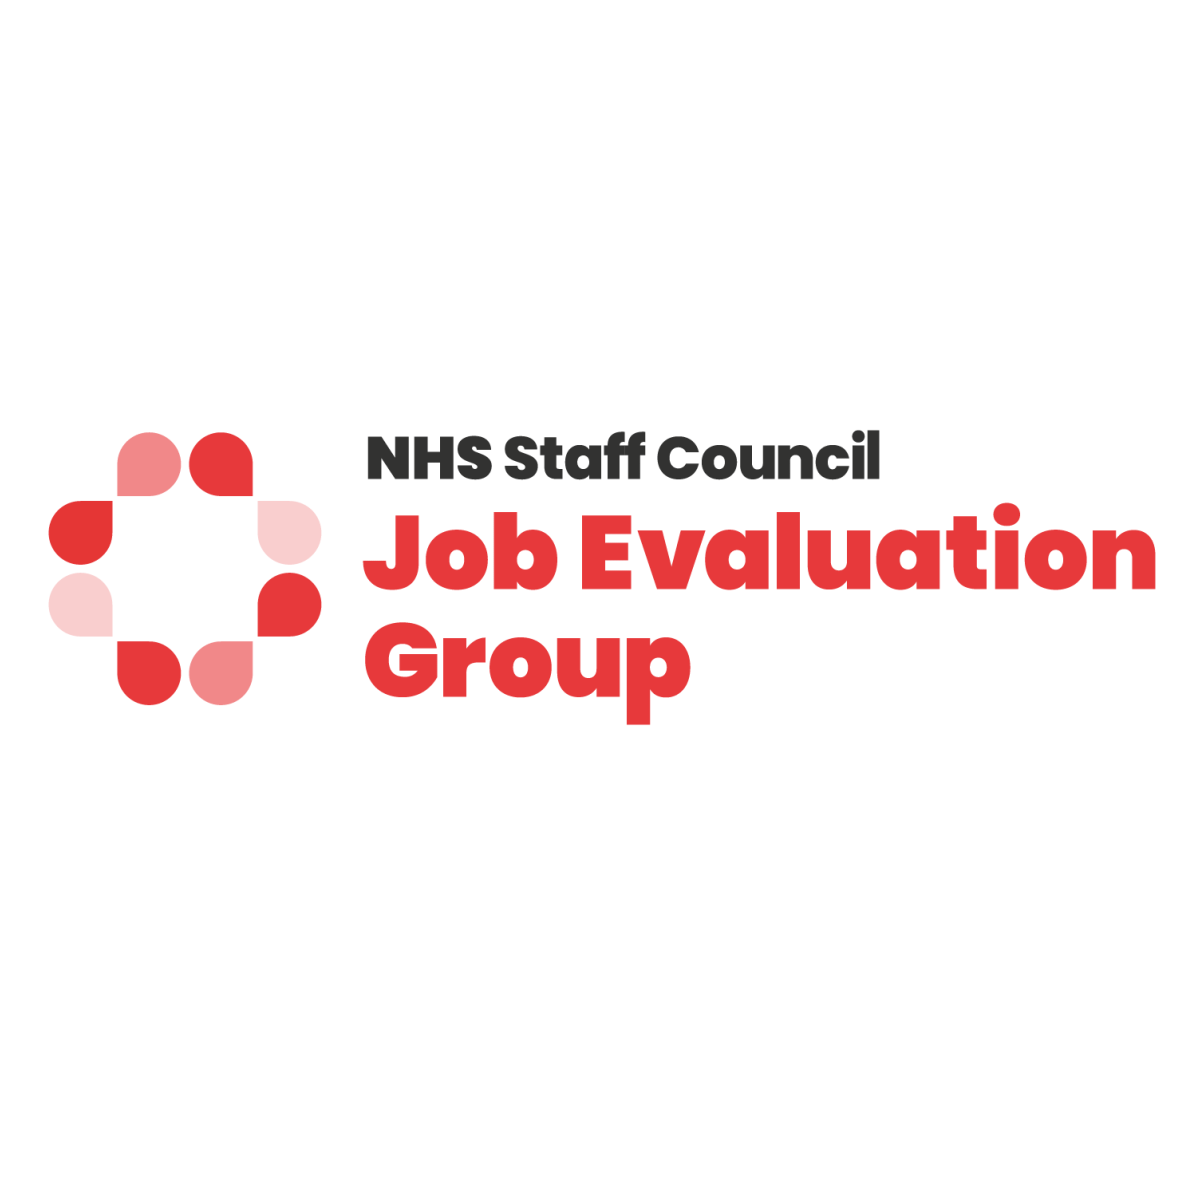 Job Evaluation Group Consultation on Amended and New Profiles